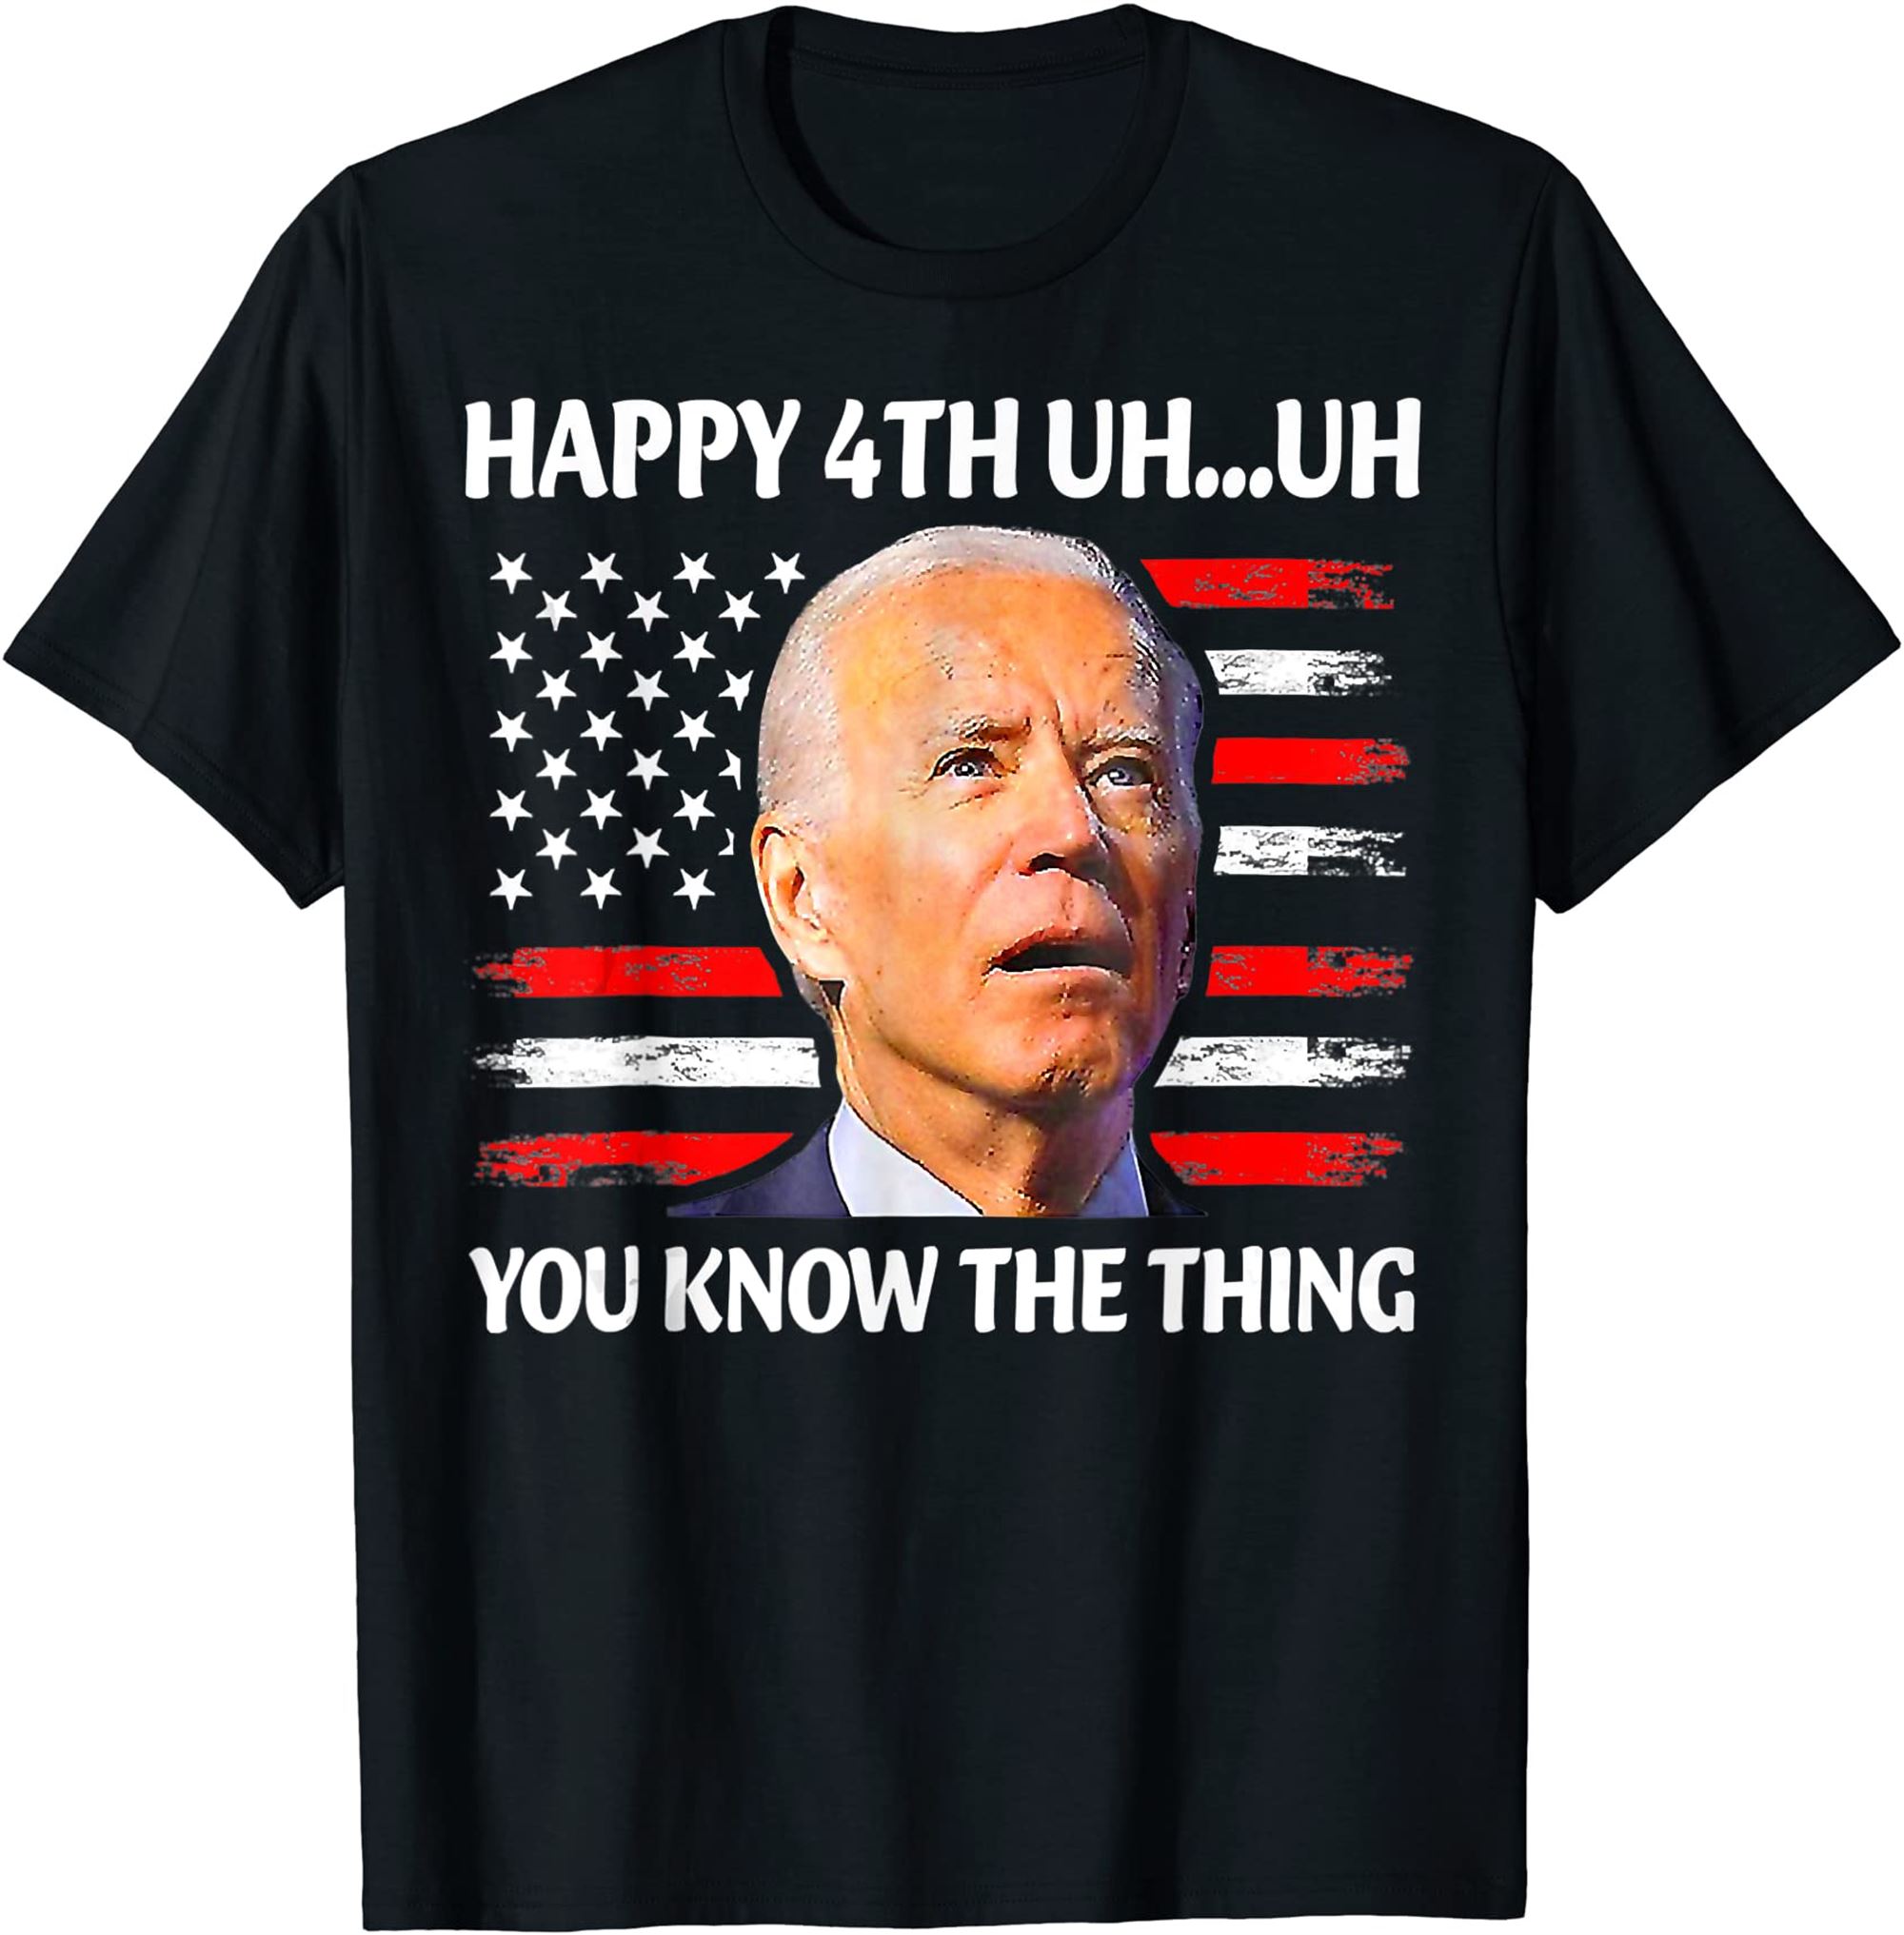 Happy Uh You Know The Thing Funny Joe Biden 4th Of July T-shirt Plus Size Up To 5xl